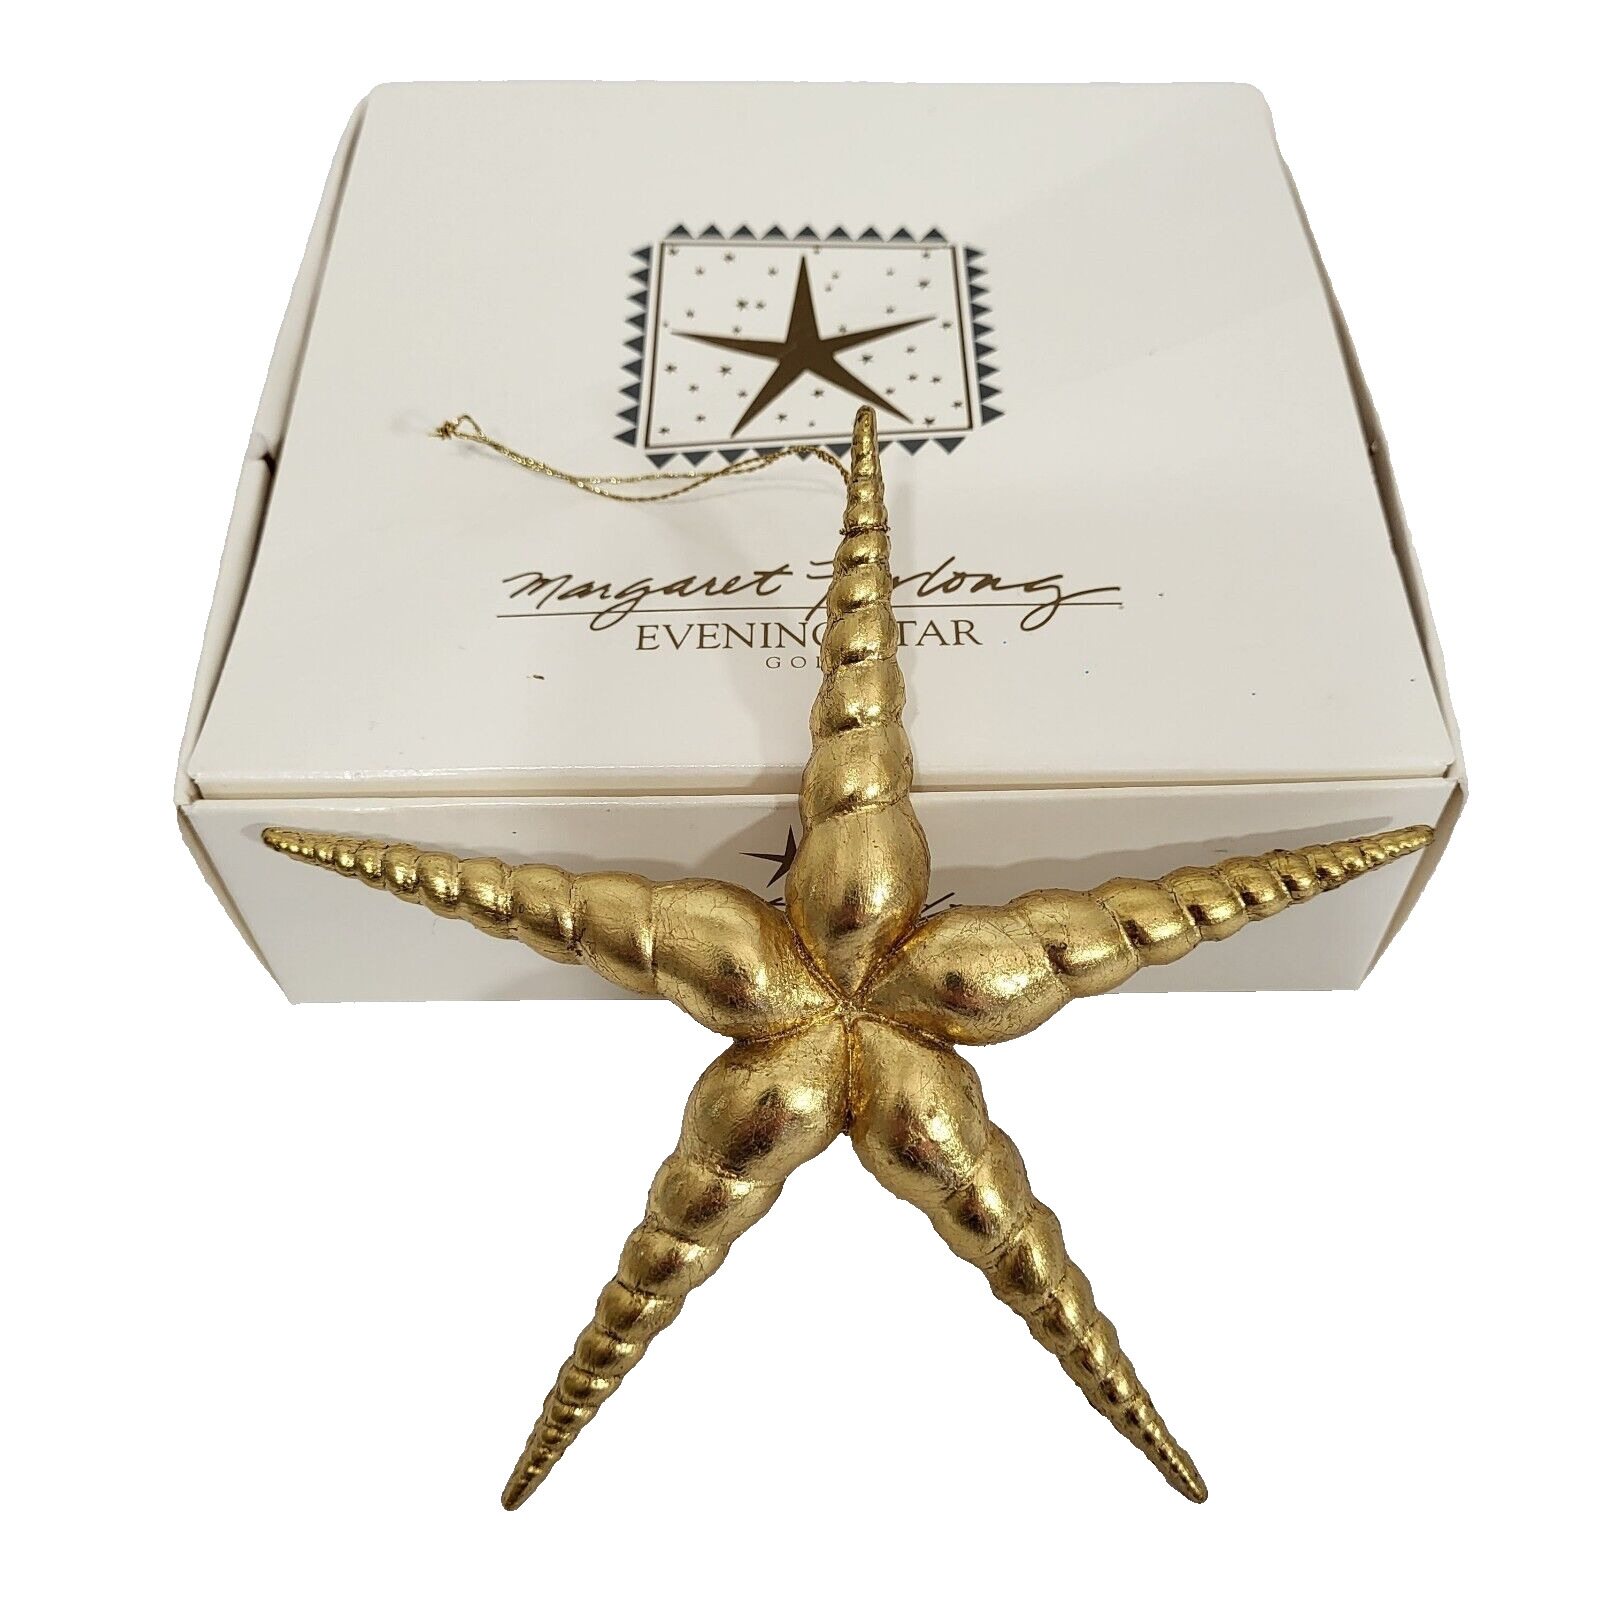 Margaret Furlong Gold Evening Star Ornament with Box